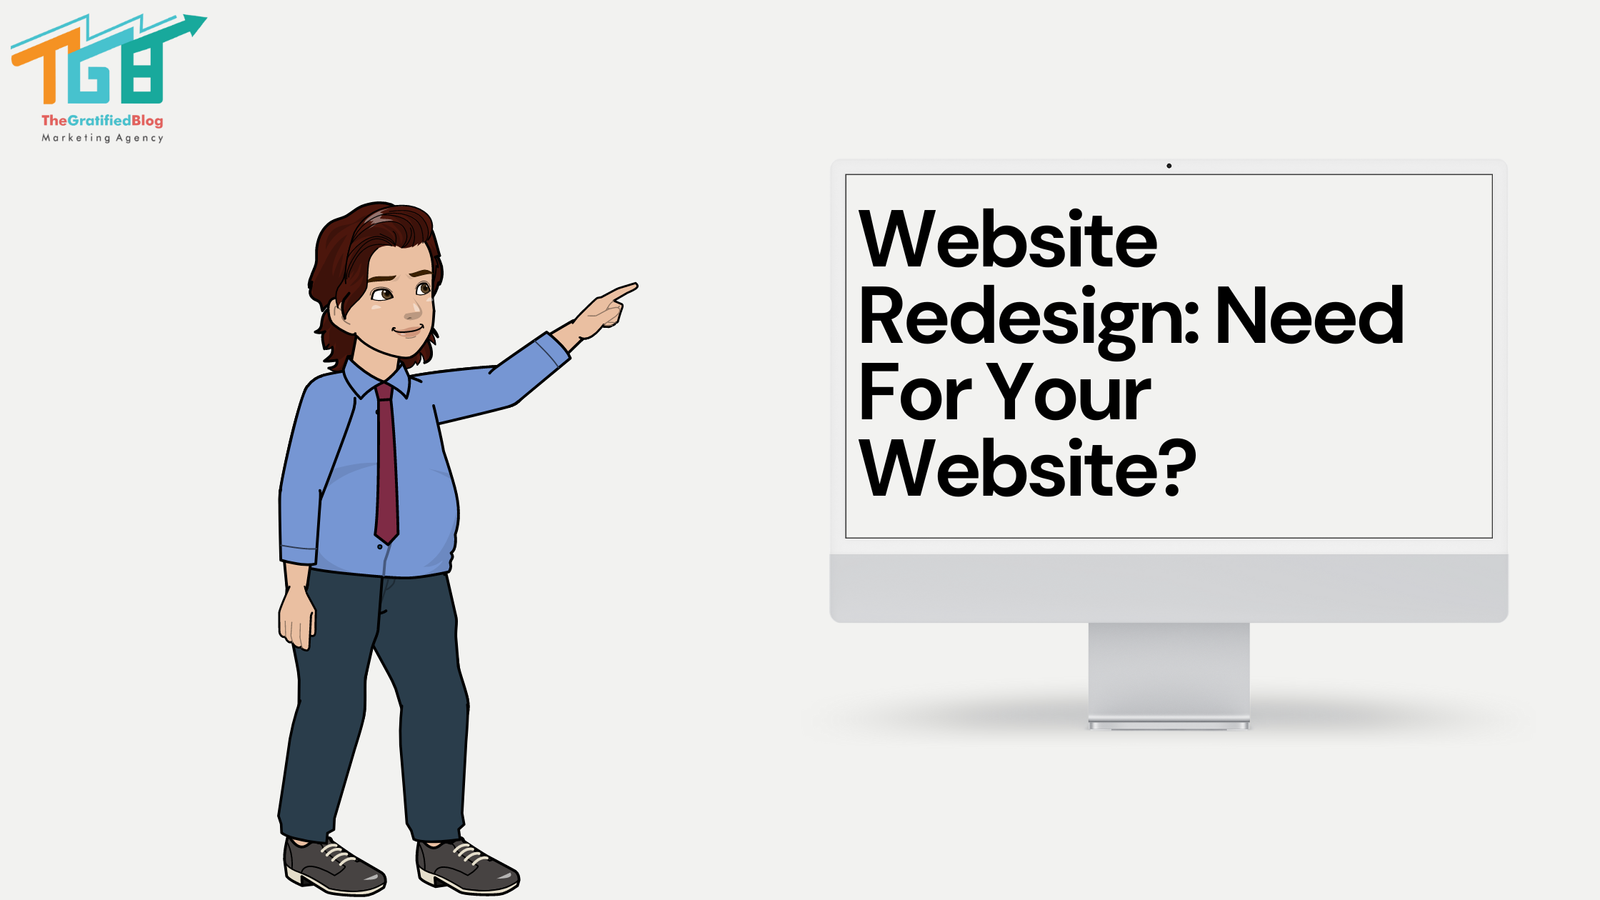 How to Redesign Your Website for Better Conversions and Site Performance?